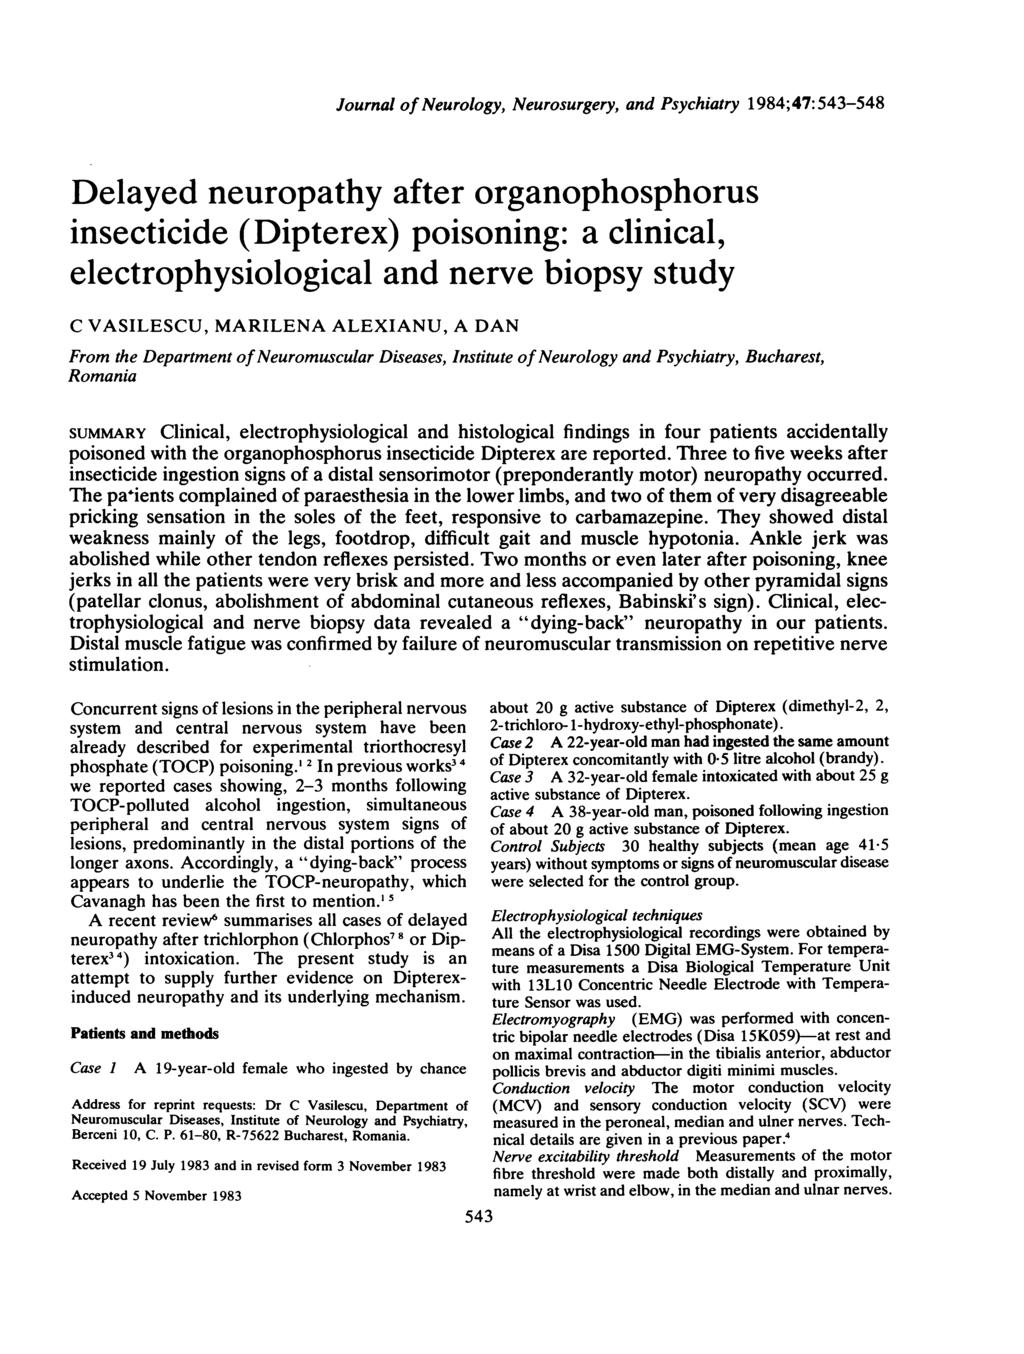 Journal of Neurology, Neurosurgery, and Psychiatry 1984;47:543-548 Delayed neuropathy after organophosphorus insecticide (Dipterex) poisoning: a clinical, electrophysiological and nerve biopsy study